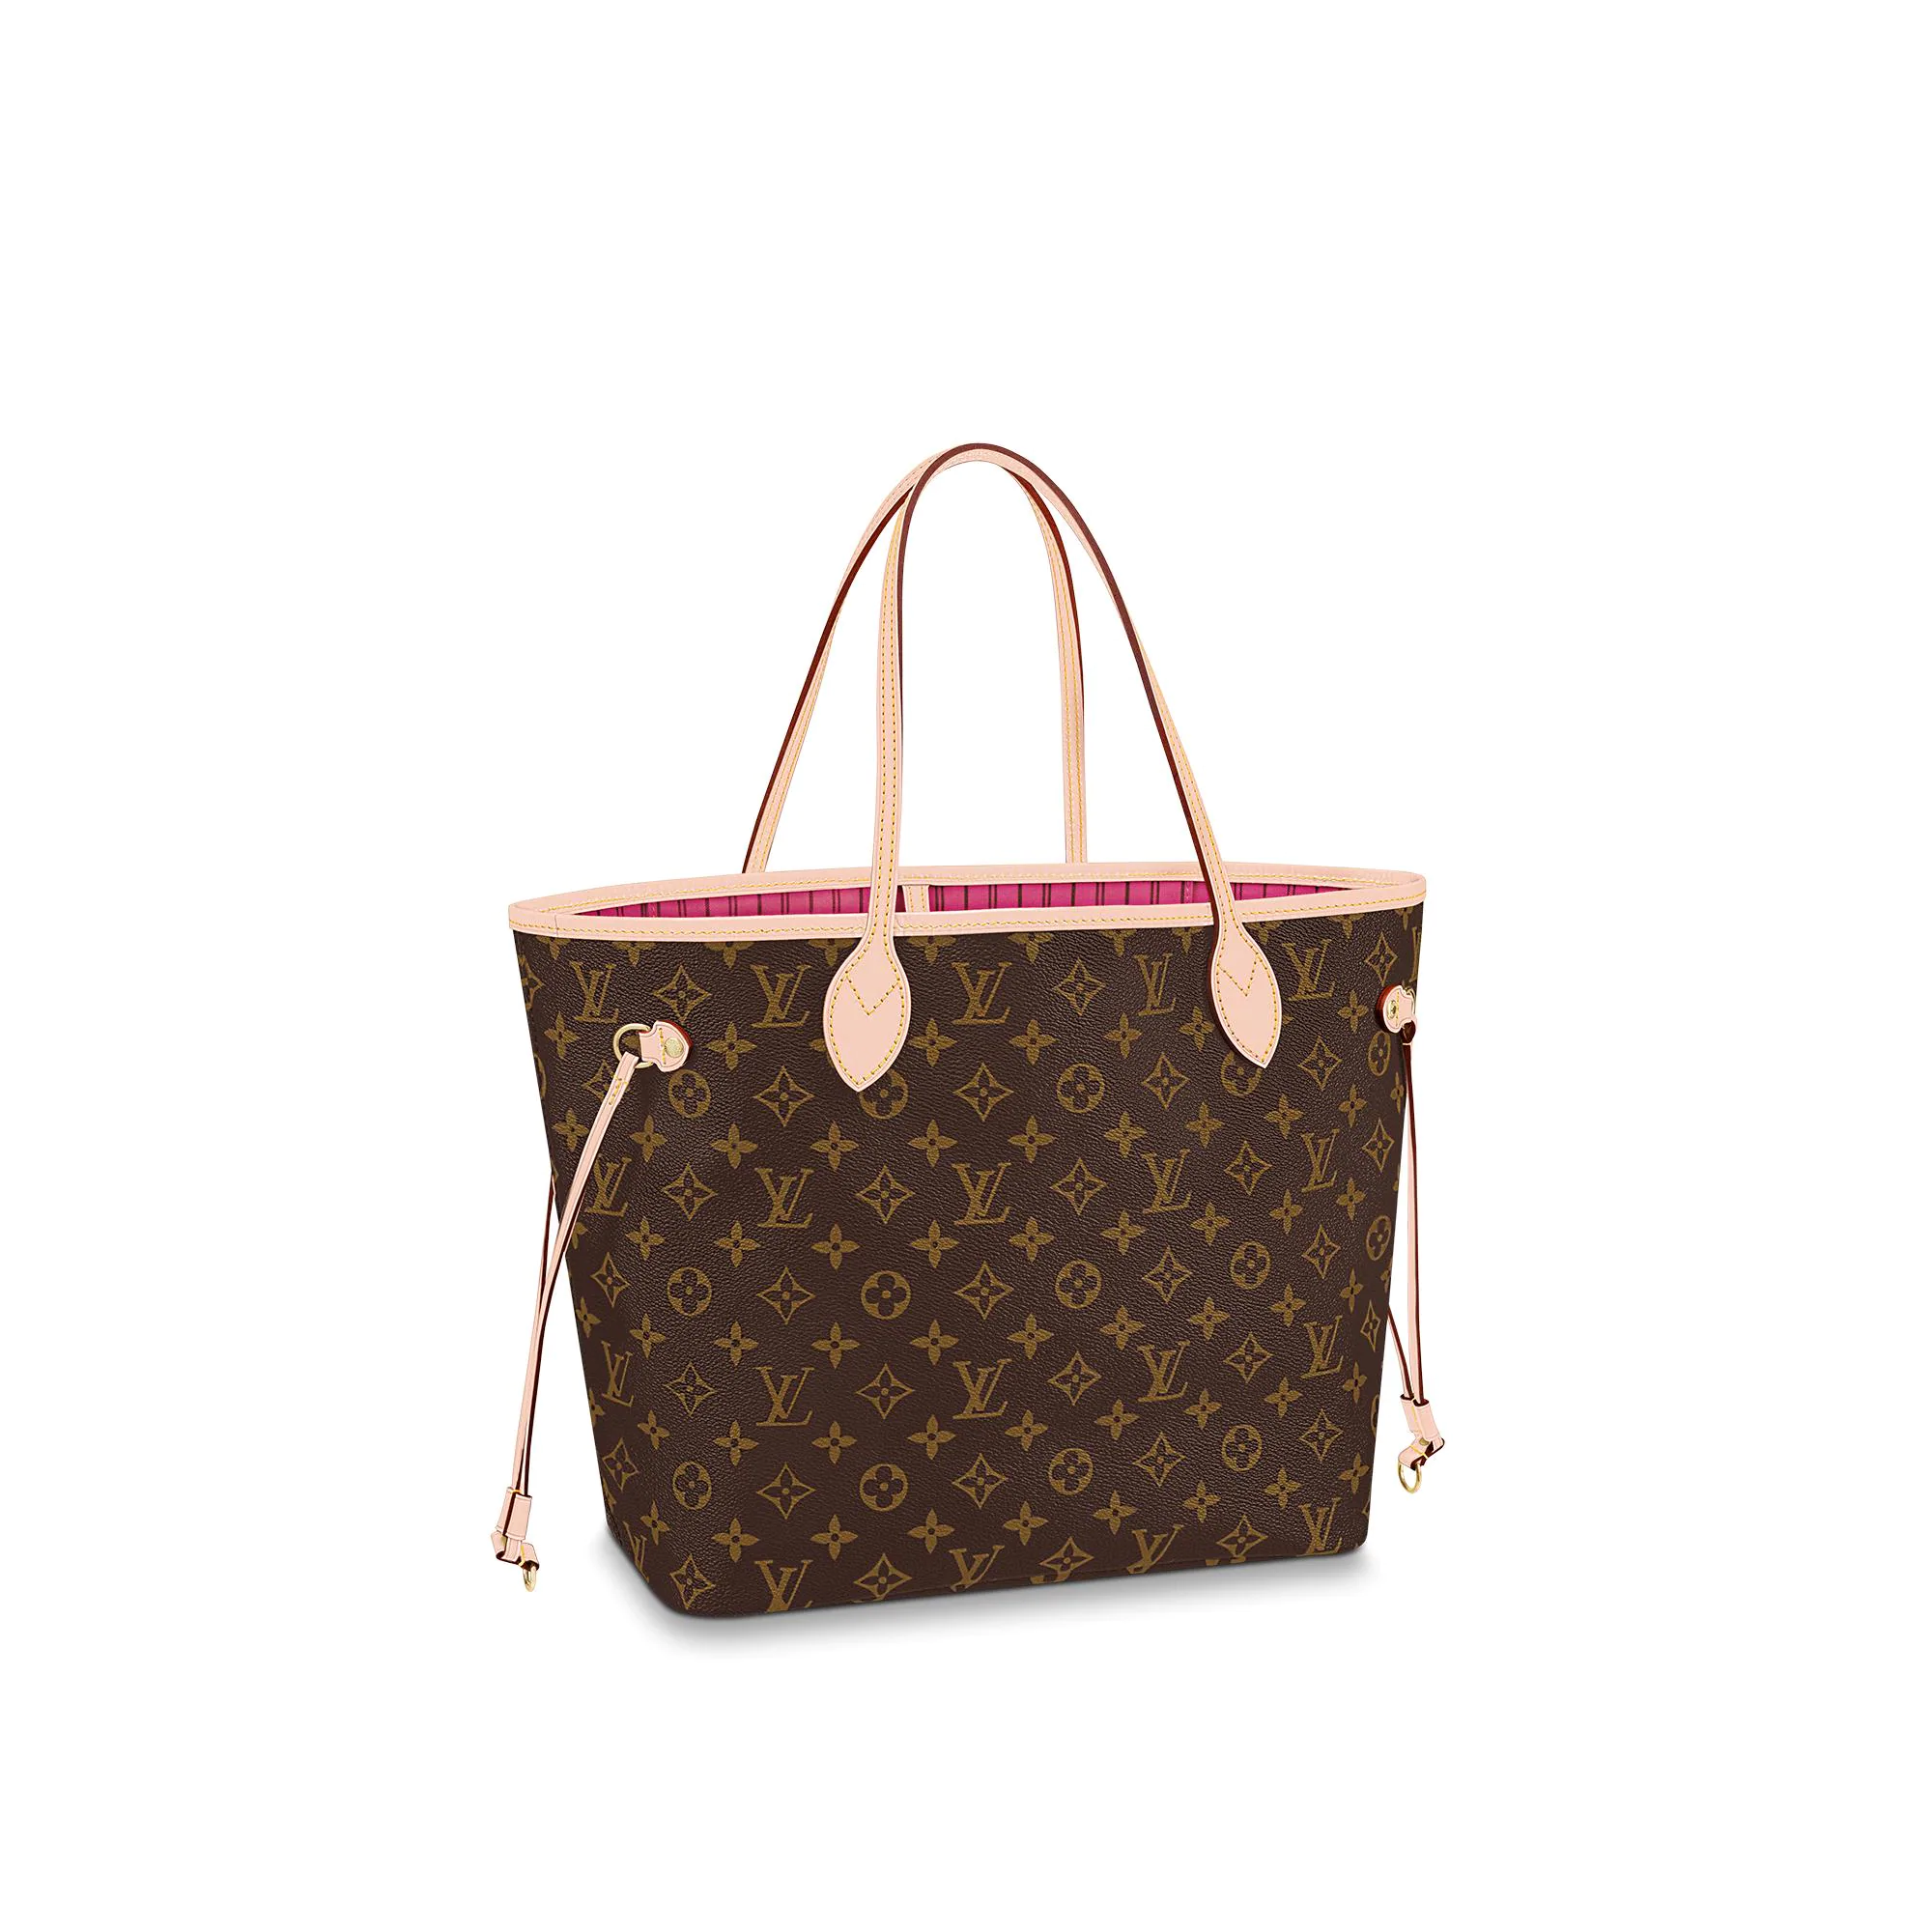 Why does everyone on the street carry the same exact Louis Vuitton bag (the  neverfull tote) when there are many other types of Louis Vuitton bags? -  Quora